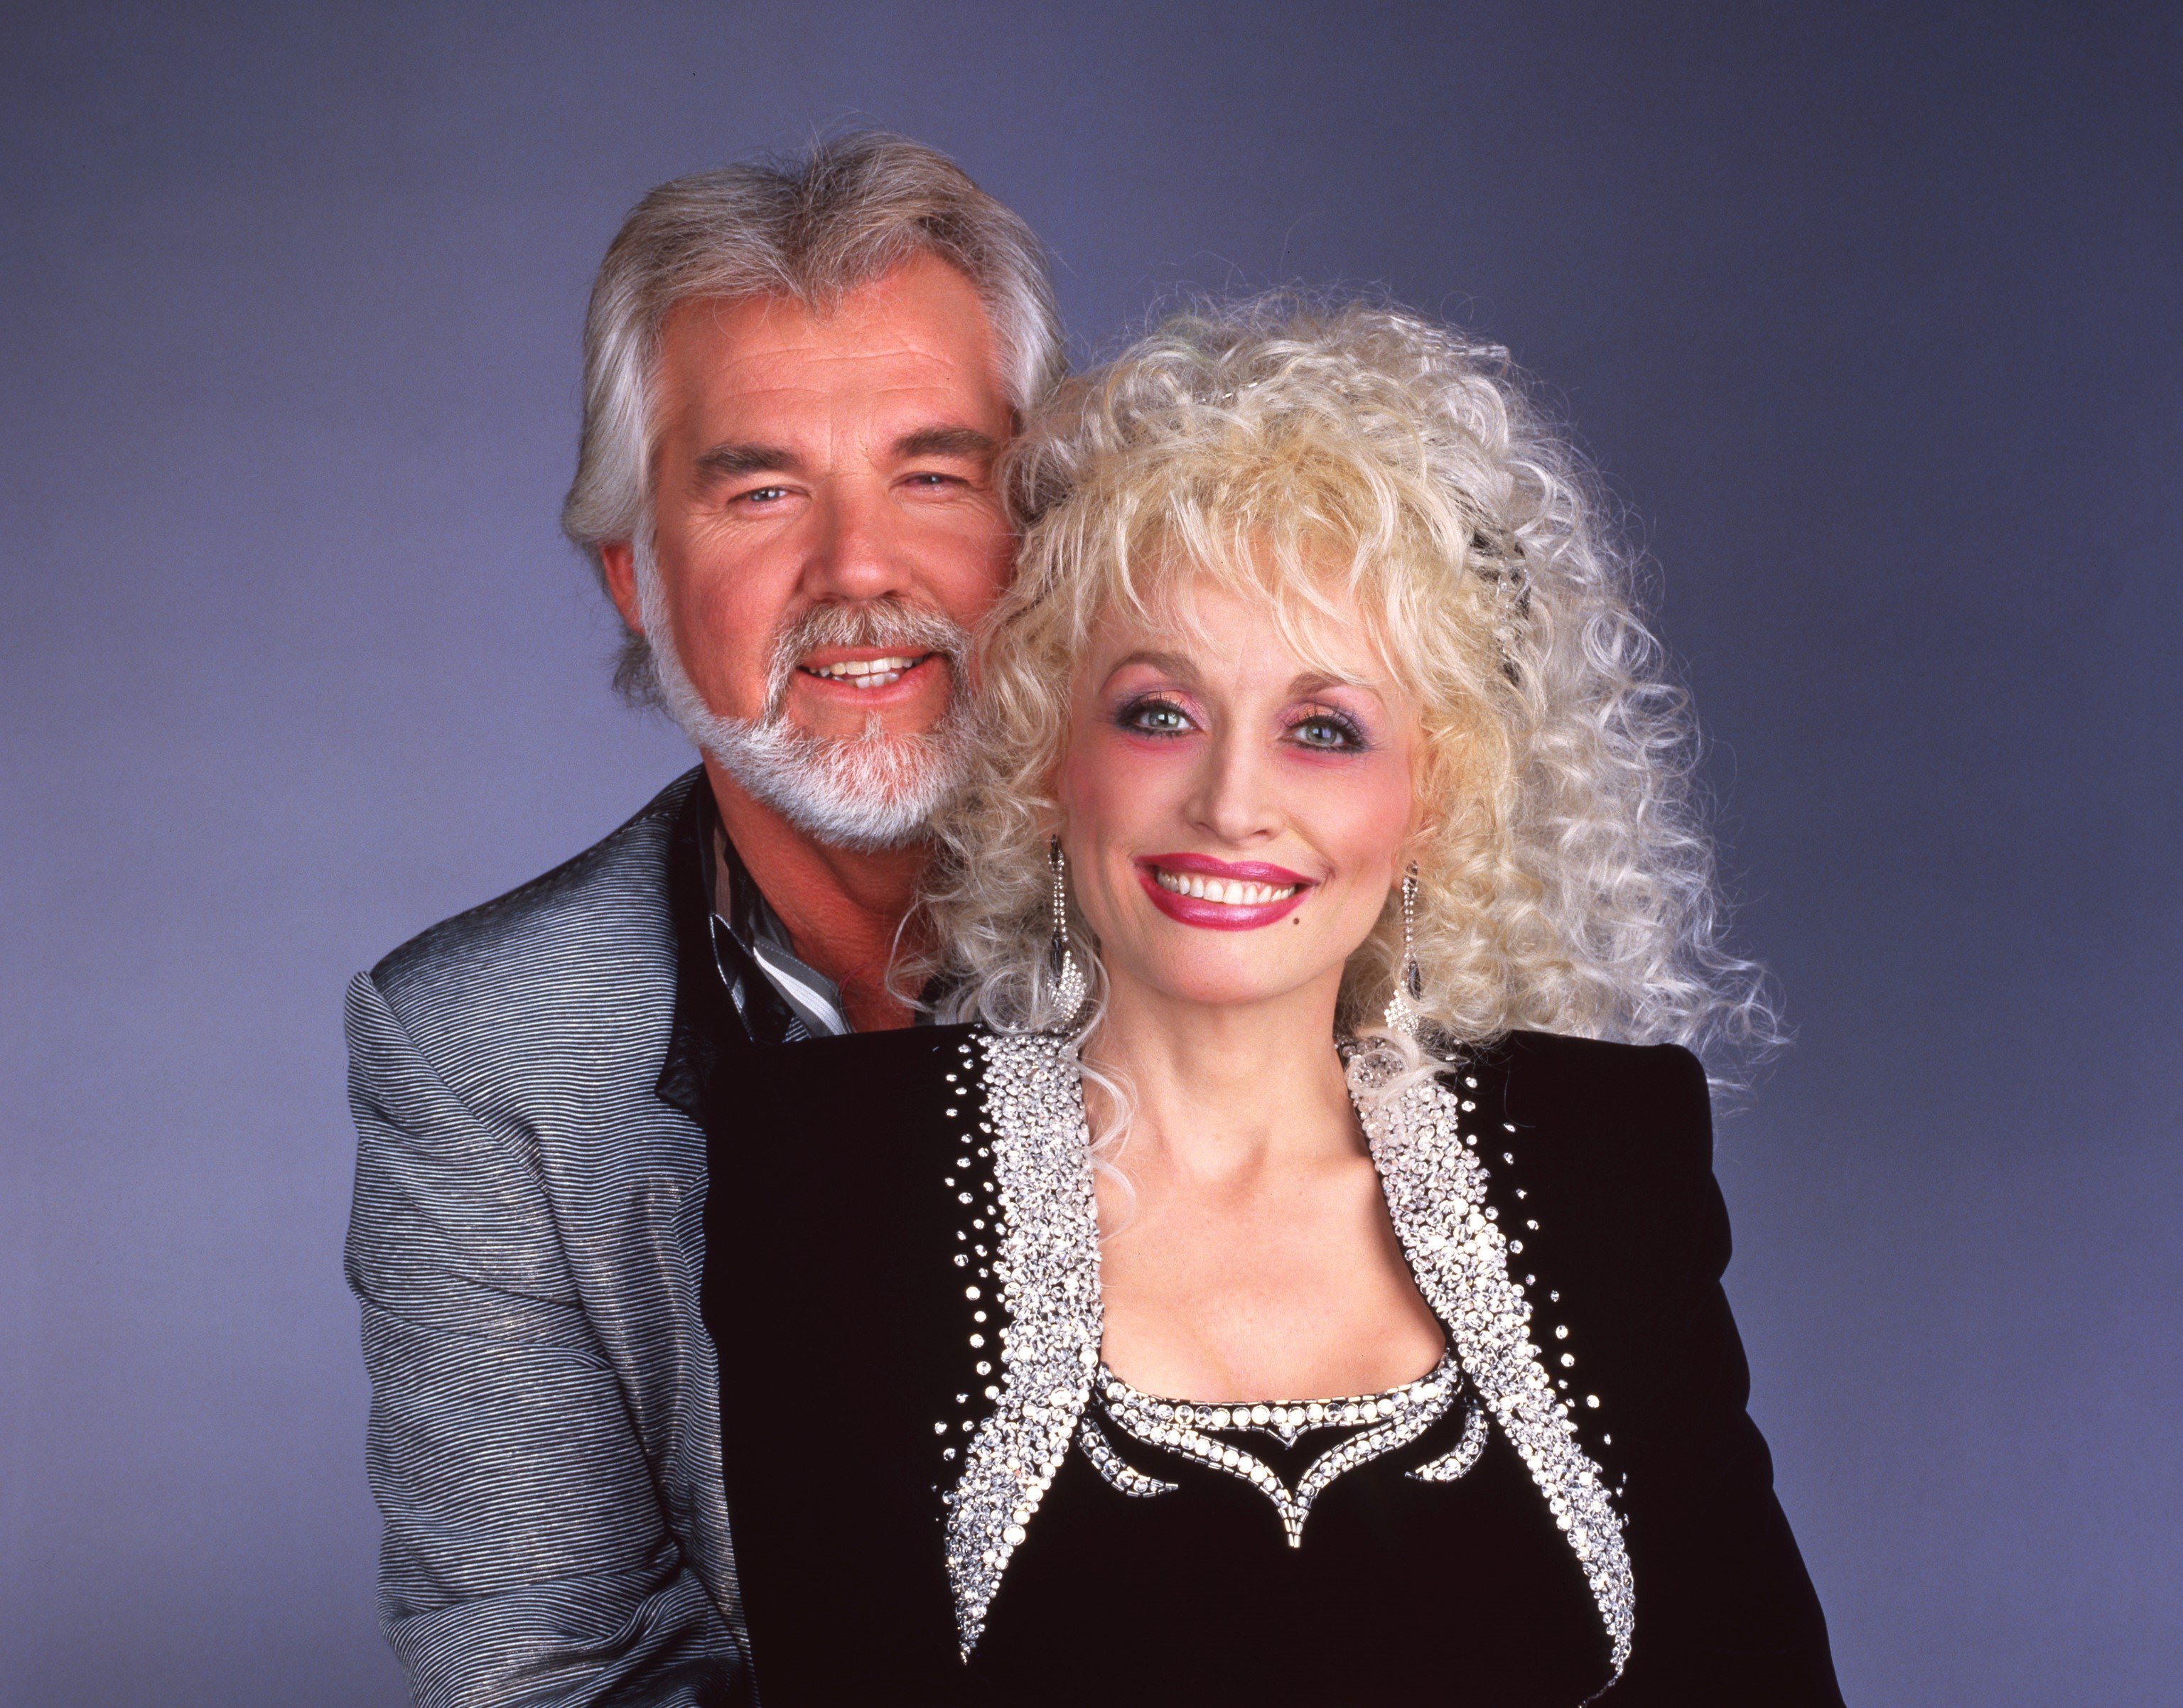 Kenny Rogers wears a gray shirt and stands behind Dolly Parton, who wears a black jacket and shirt.